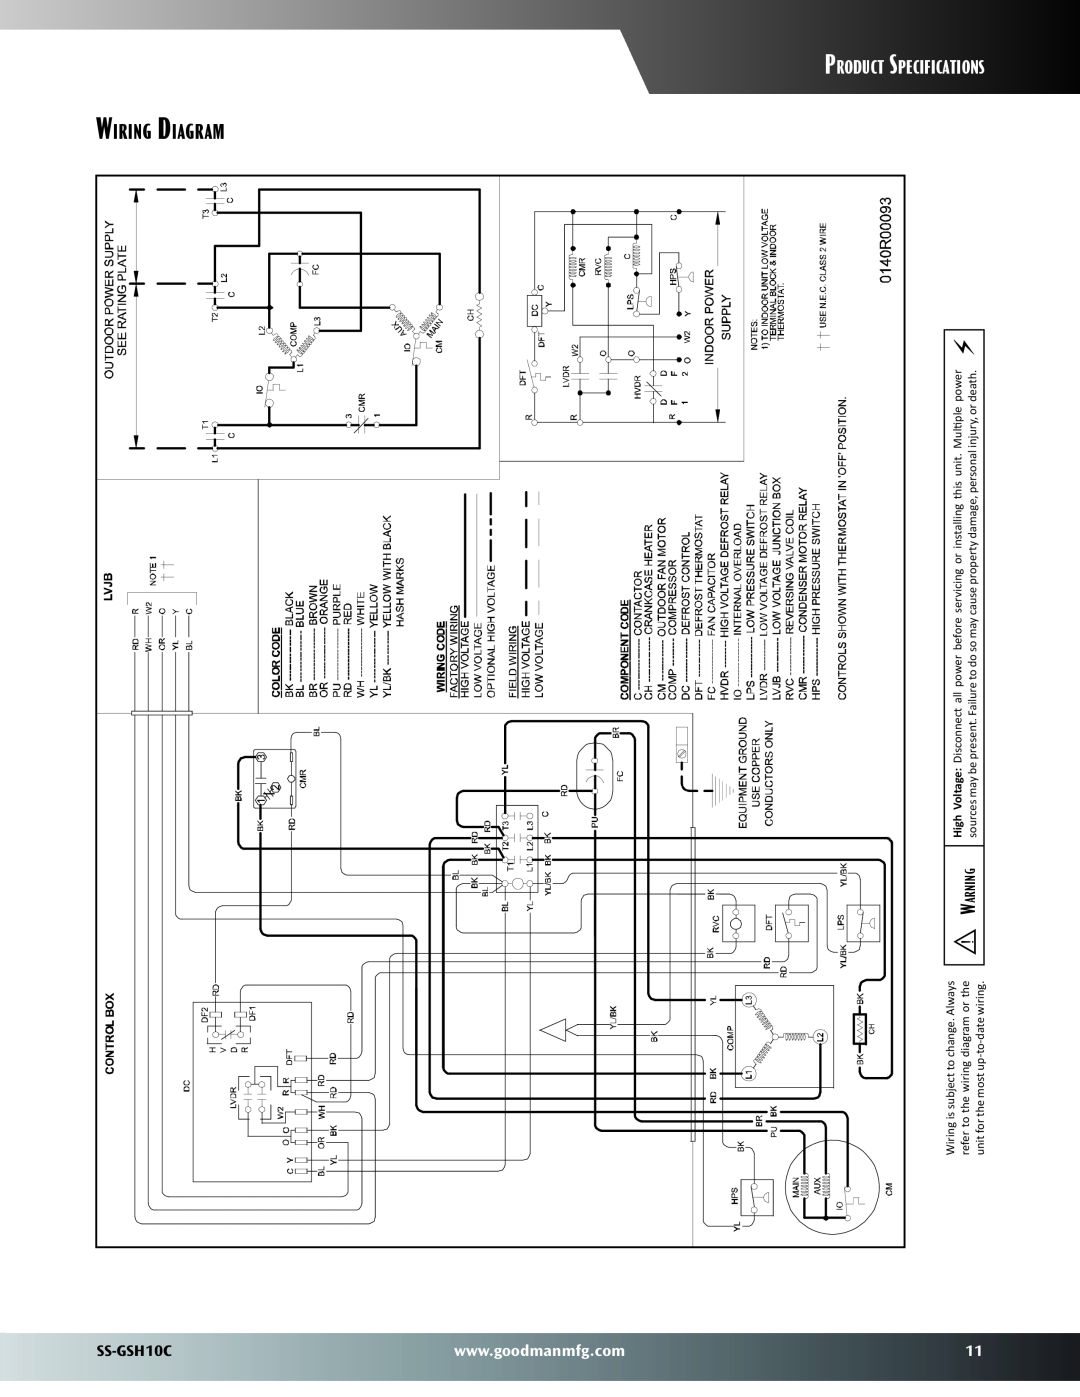 Goodman Mfg SS-GSH10C warranty Specifications, Diagram, Product, Wiring is subject to change. Always 